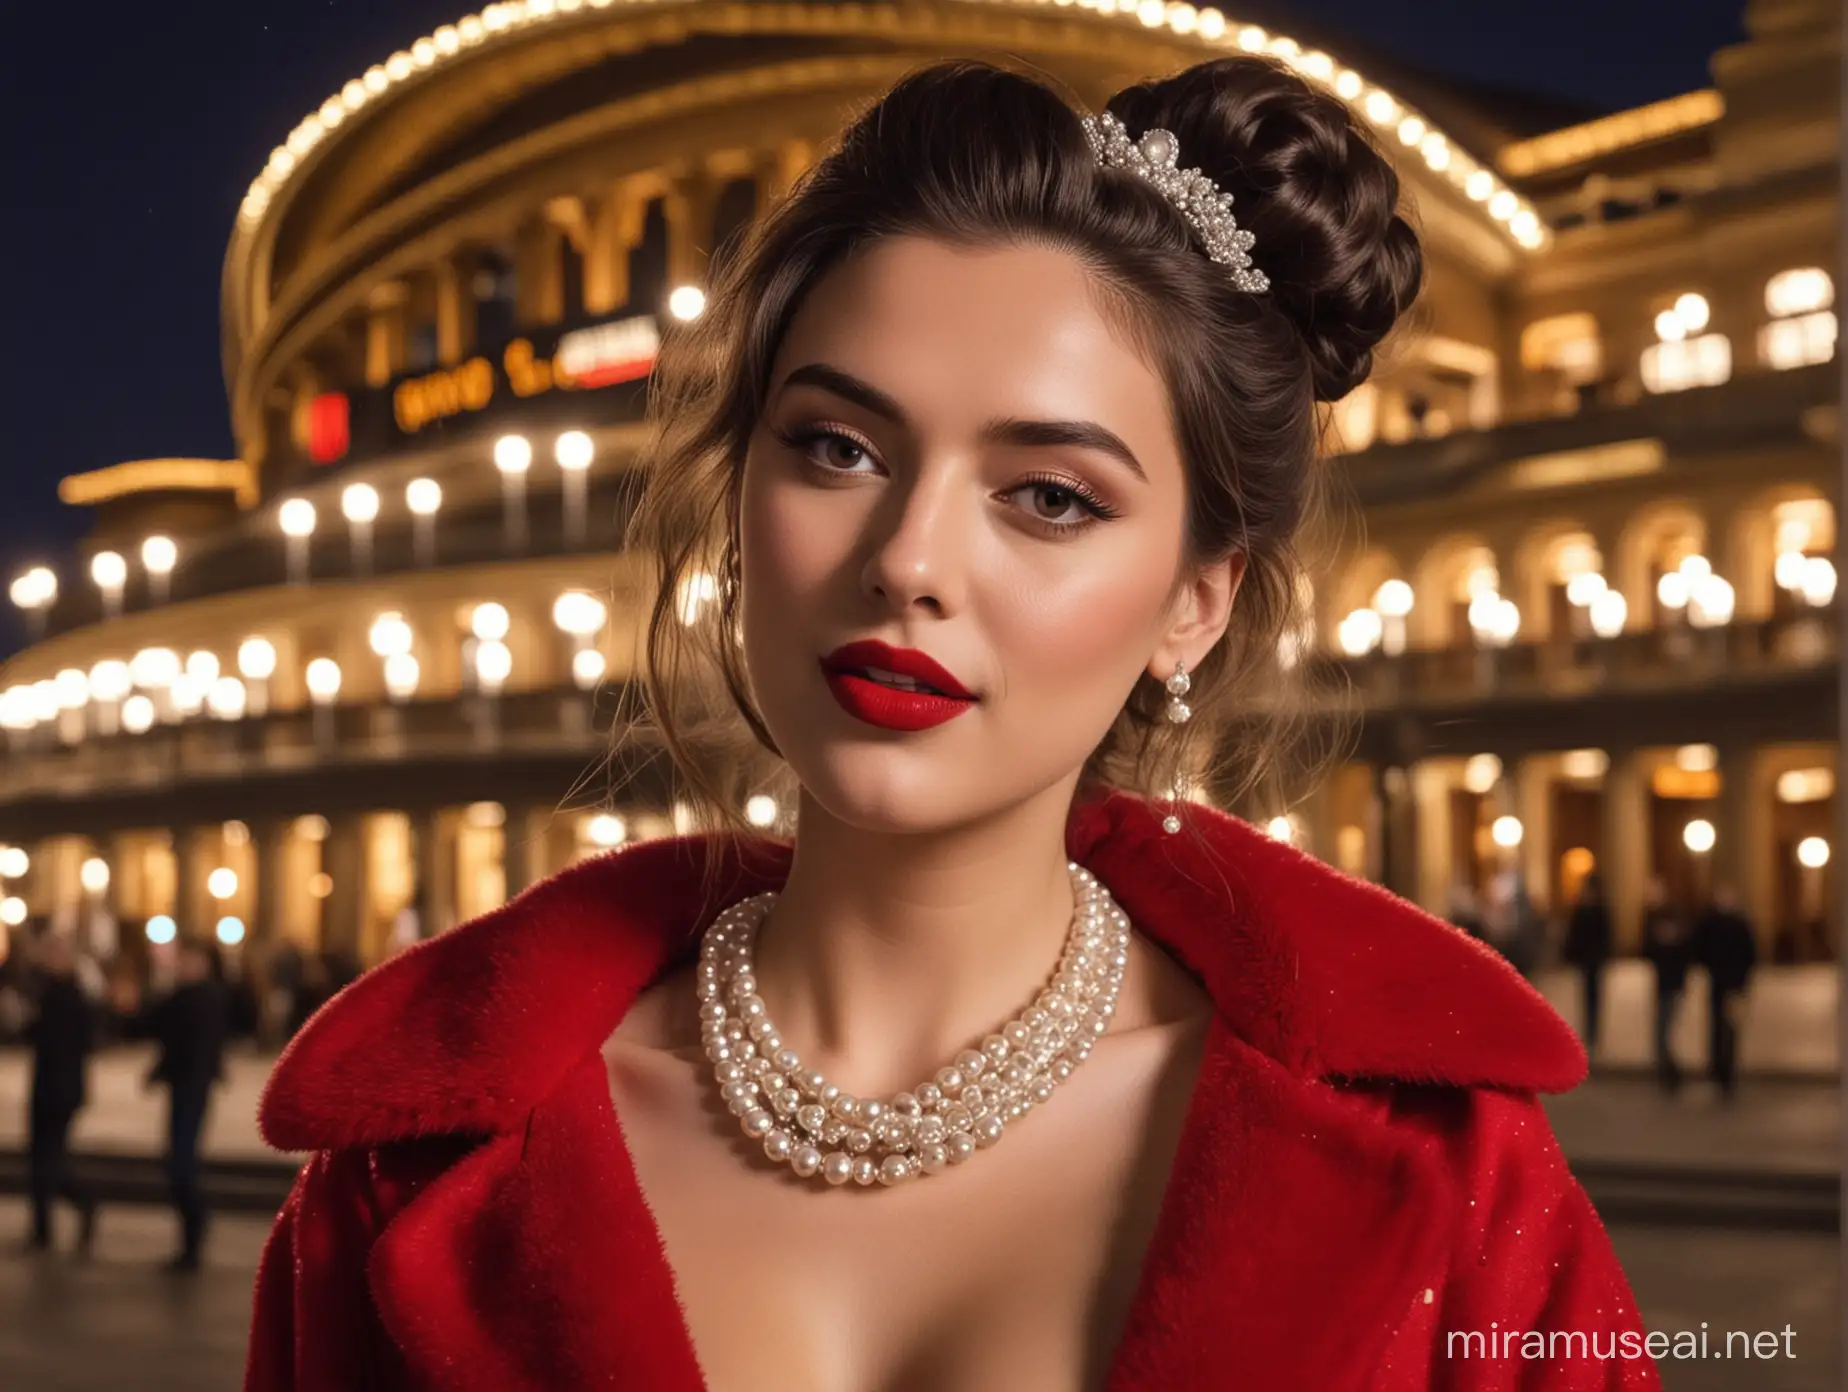 Elegant Party Girl in Pearl Necklace and Red Lipstick Exiting Opera House